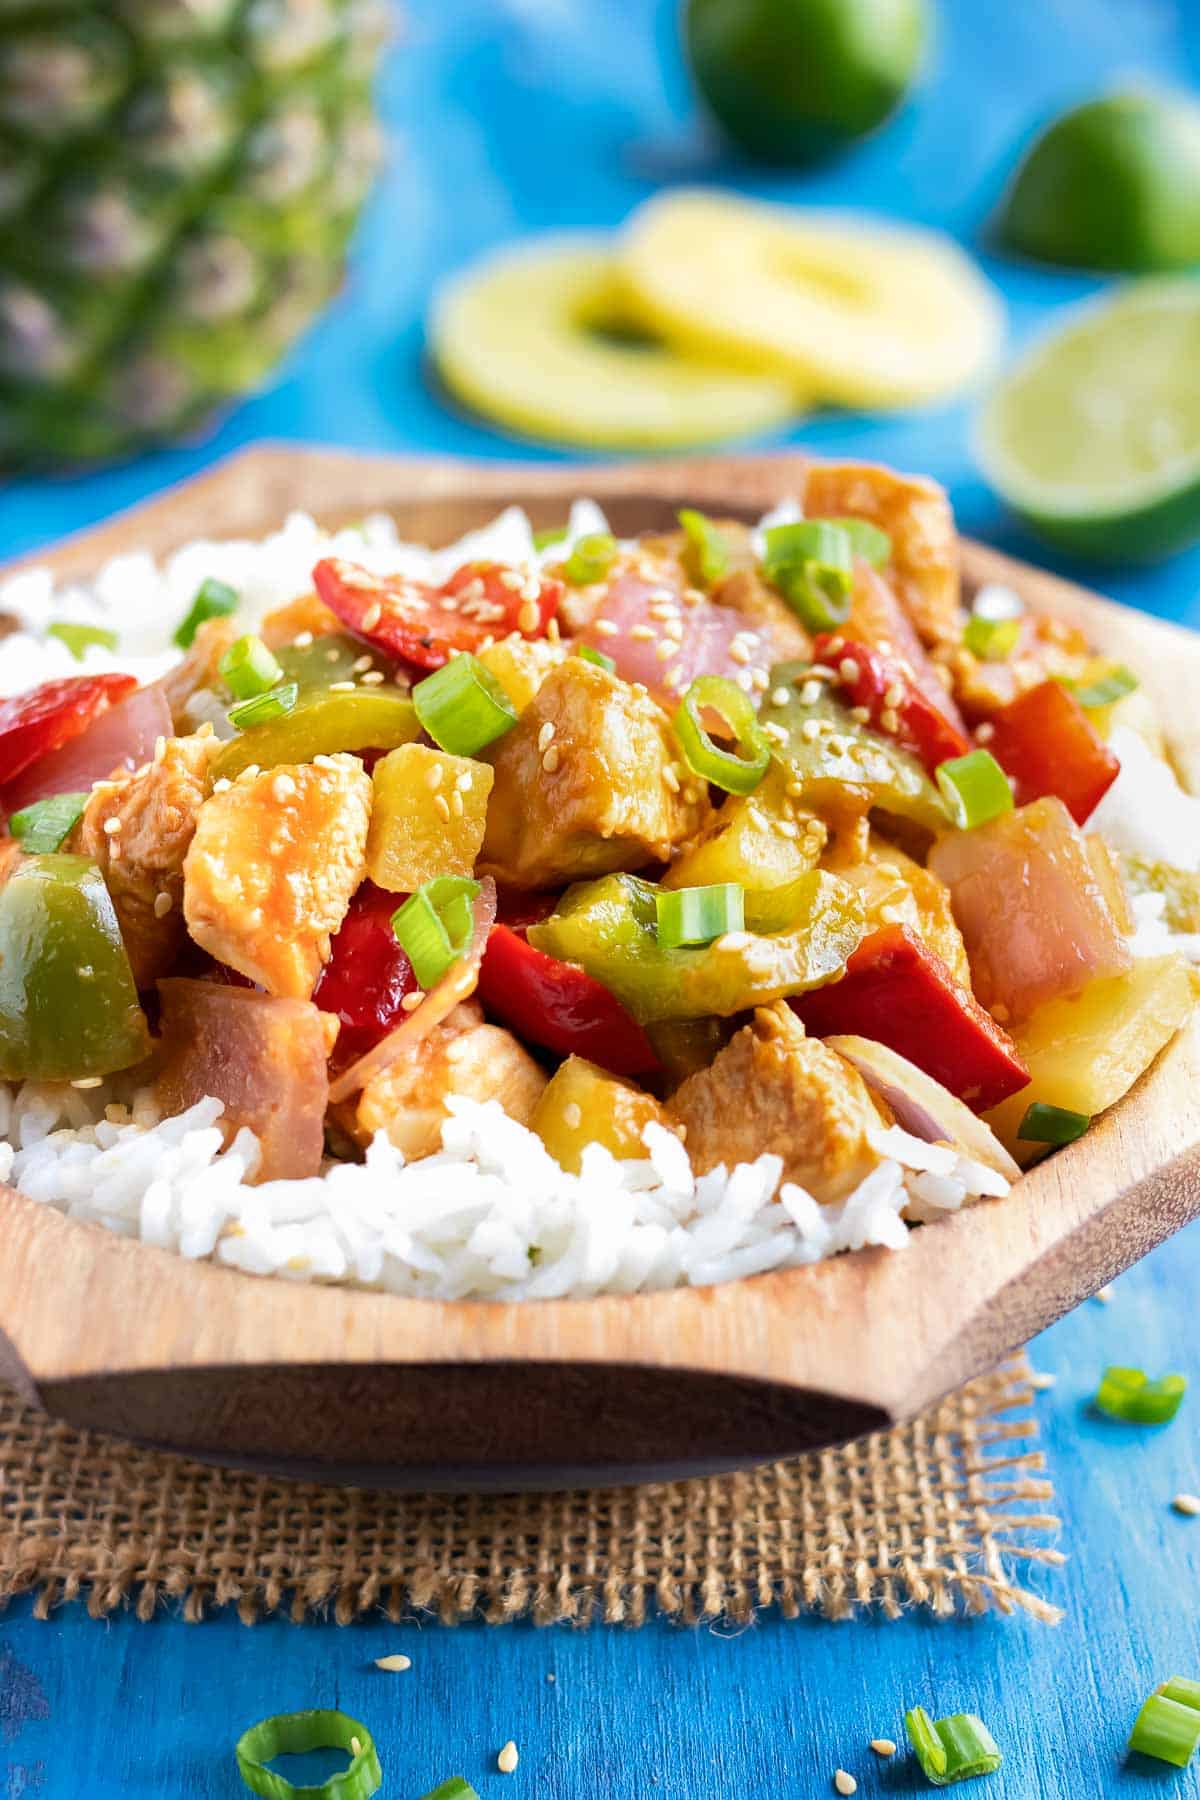 Pineapple chicken stir-fry in a wooden bowl with white rice.